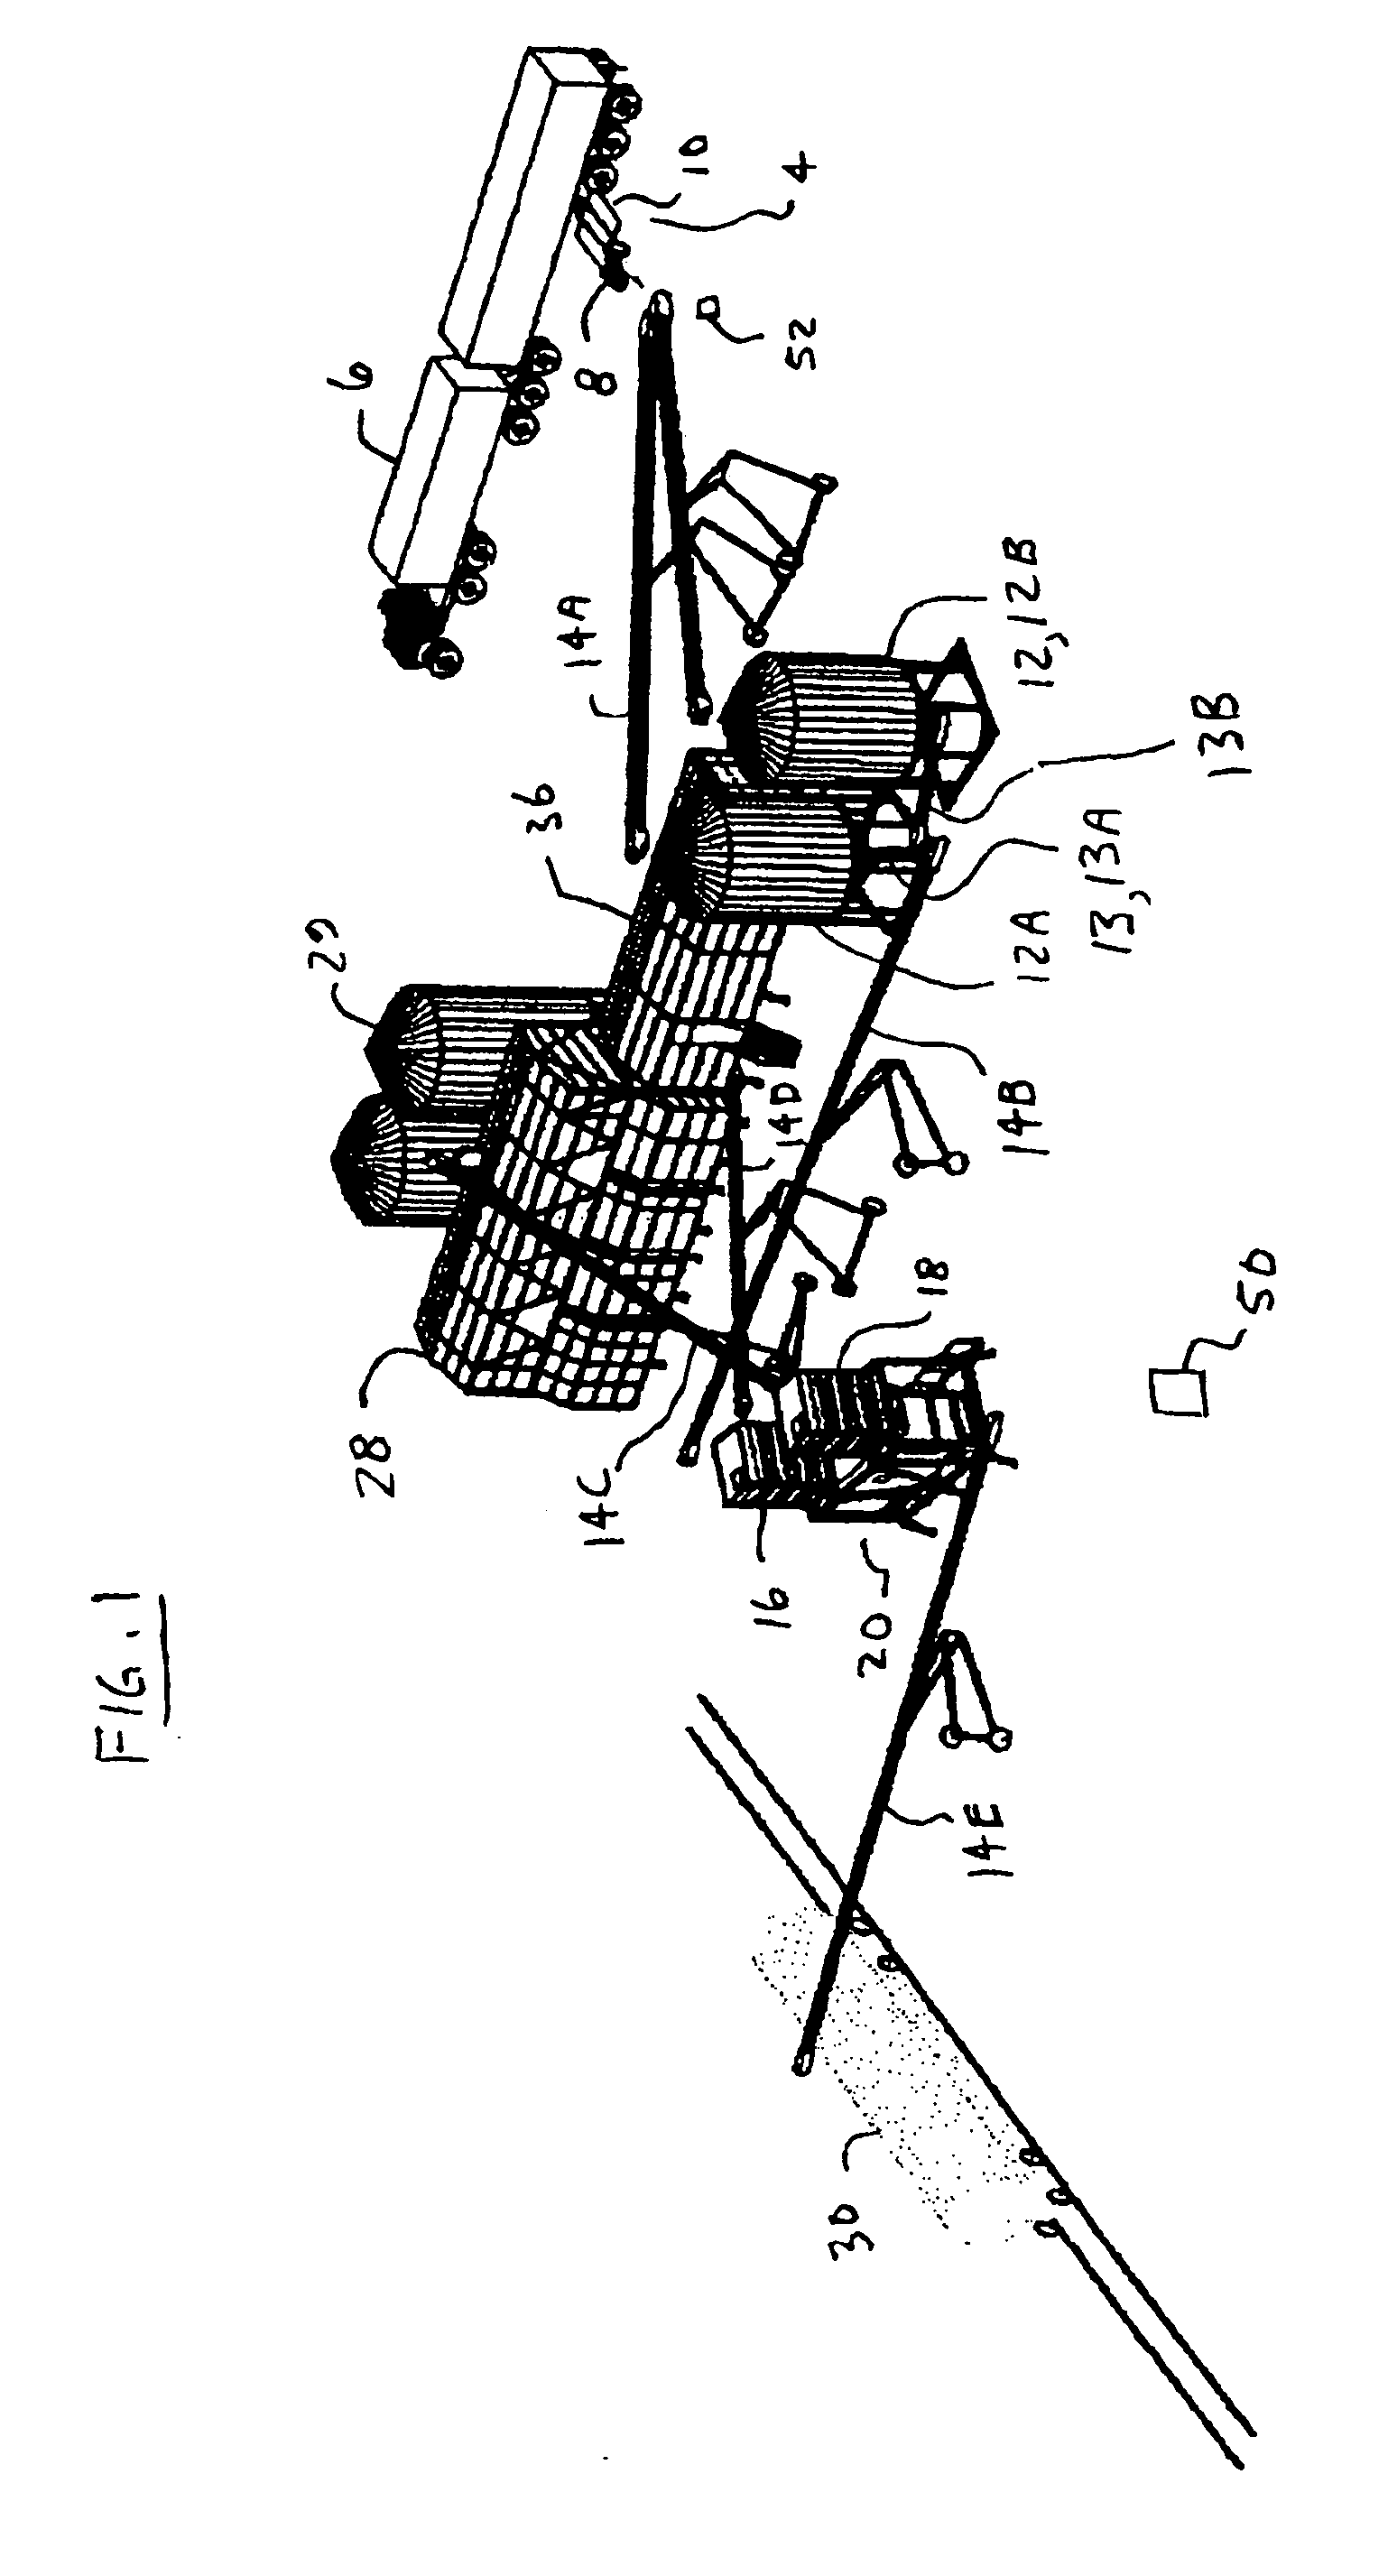 Method and apparatus for moving agricultural commodities